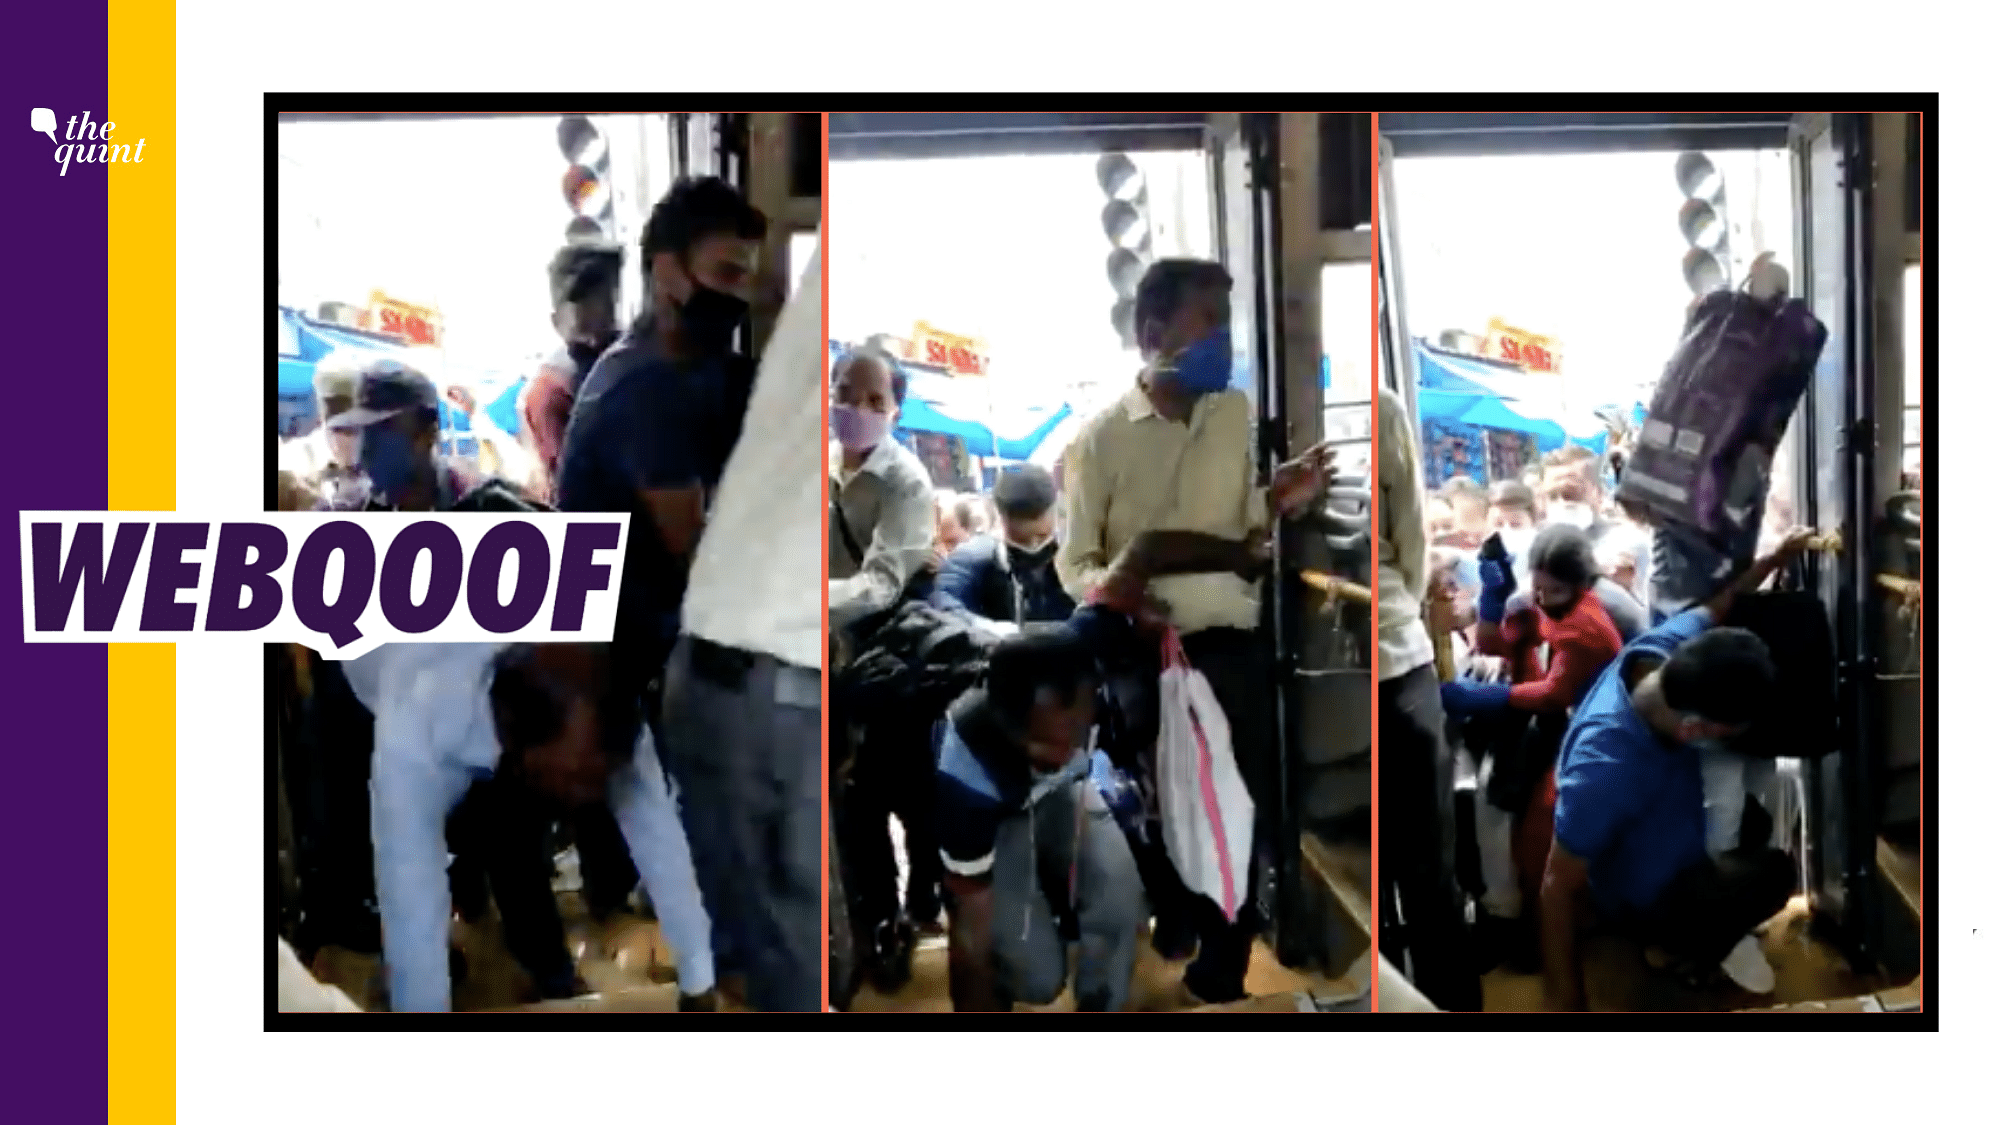 The video shows a large number of people falling over each other in their efforts to board a bus in haste.